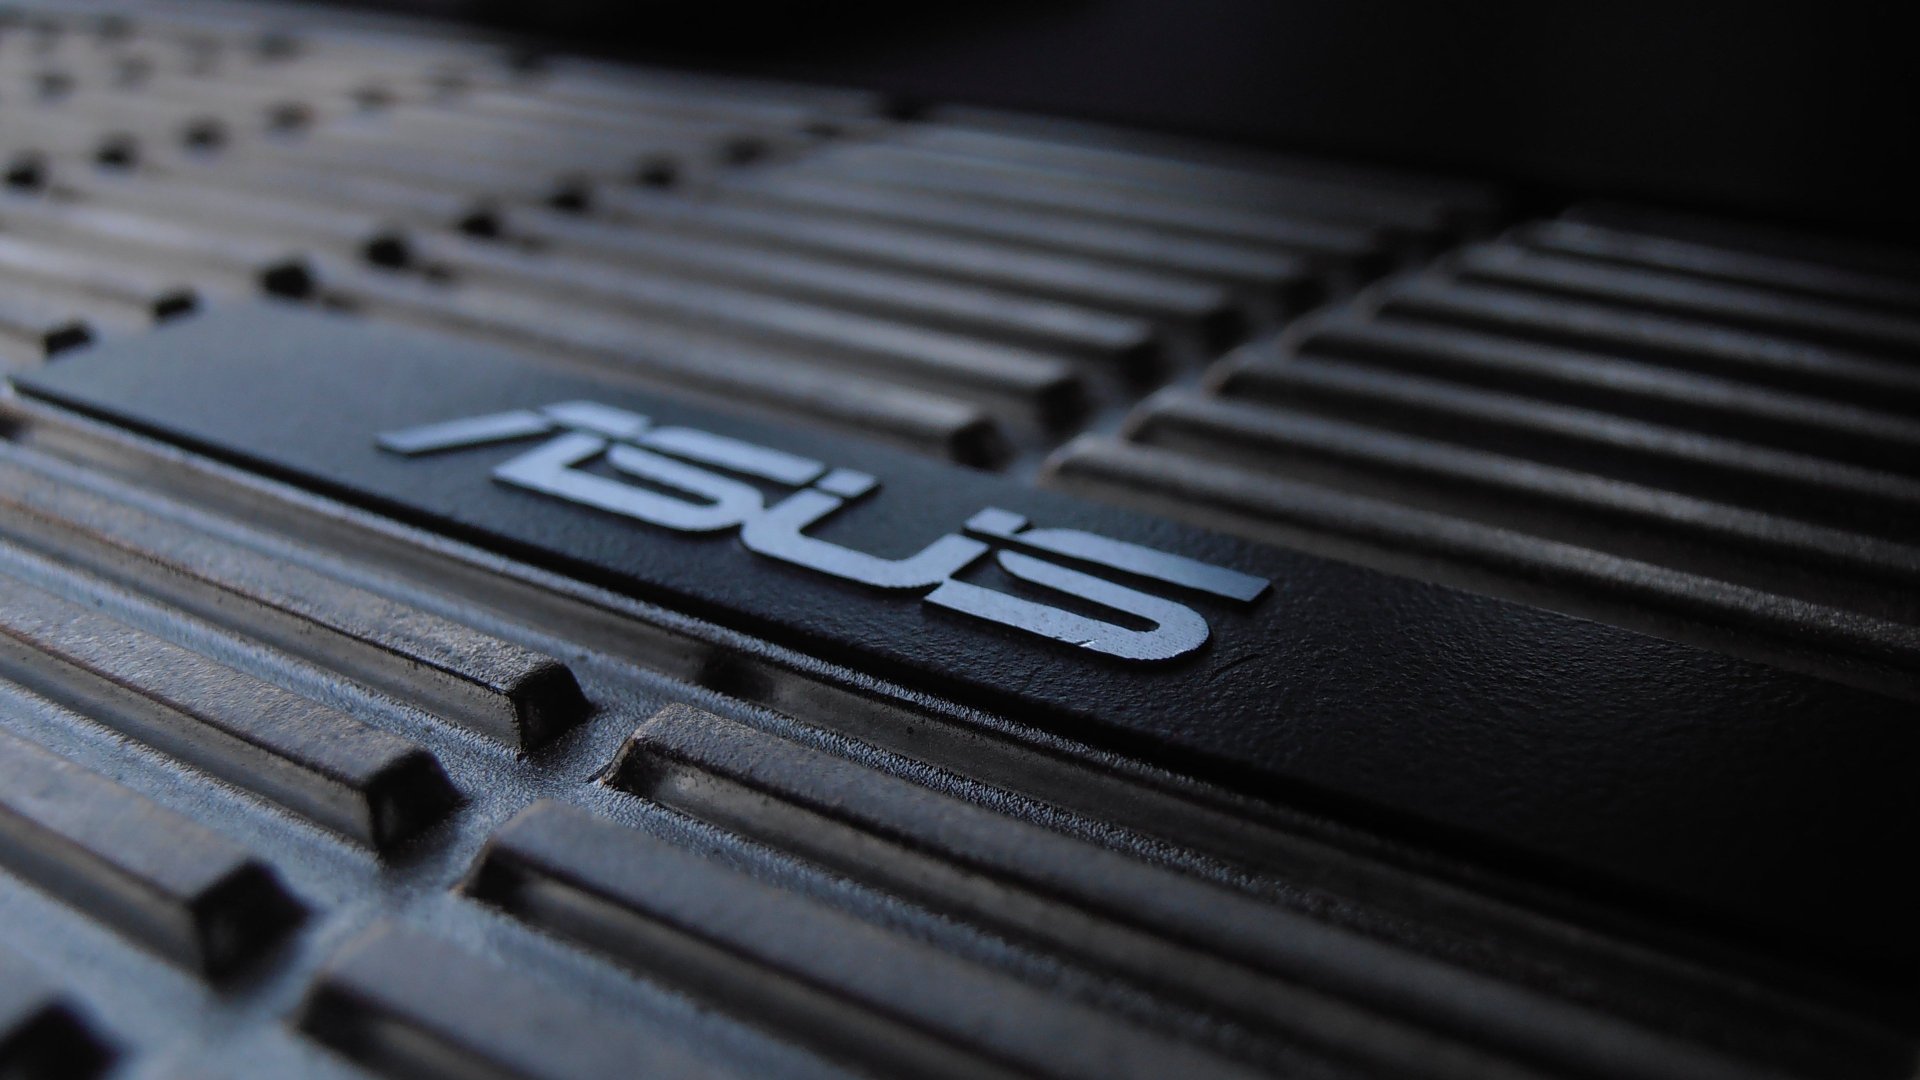 Technology Asus HD Wallpaper | Background Image